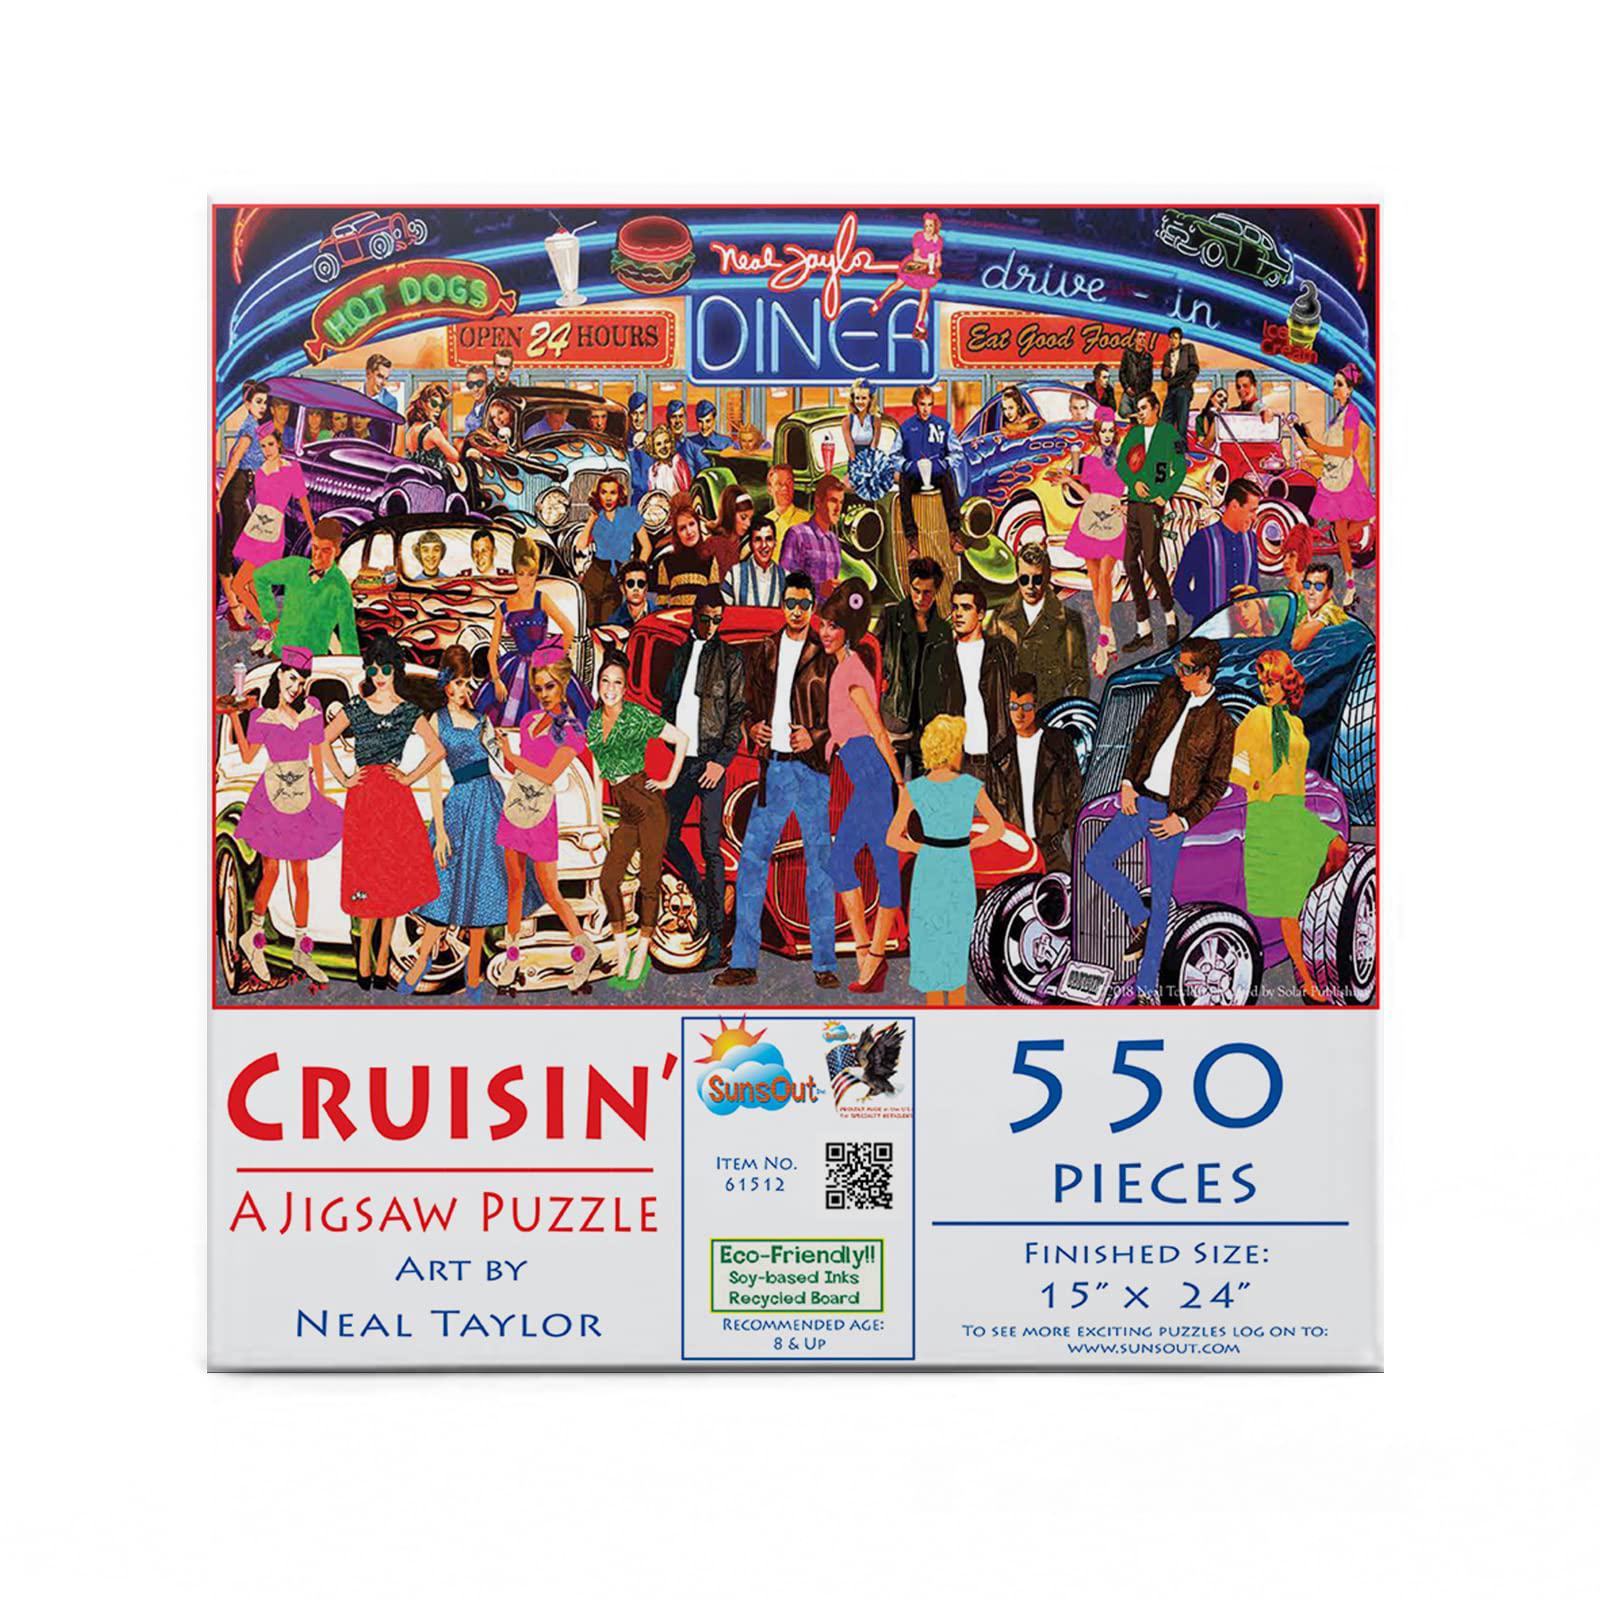 sunsout inc - cruisin - 550 pc jigsaw puzzle by artist: neal taylor - finished size 15" x 24" - mpn# 61512